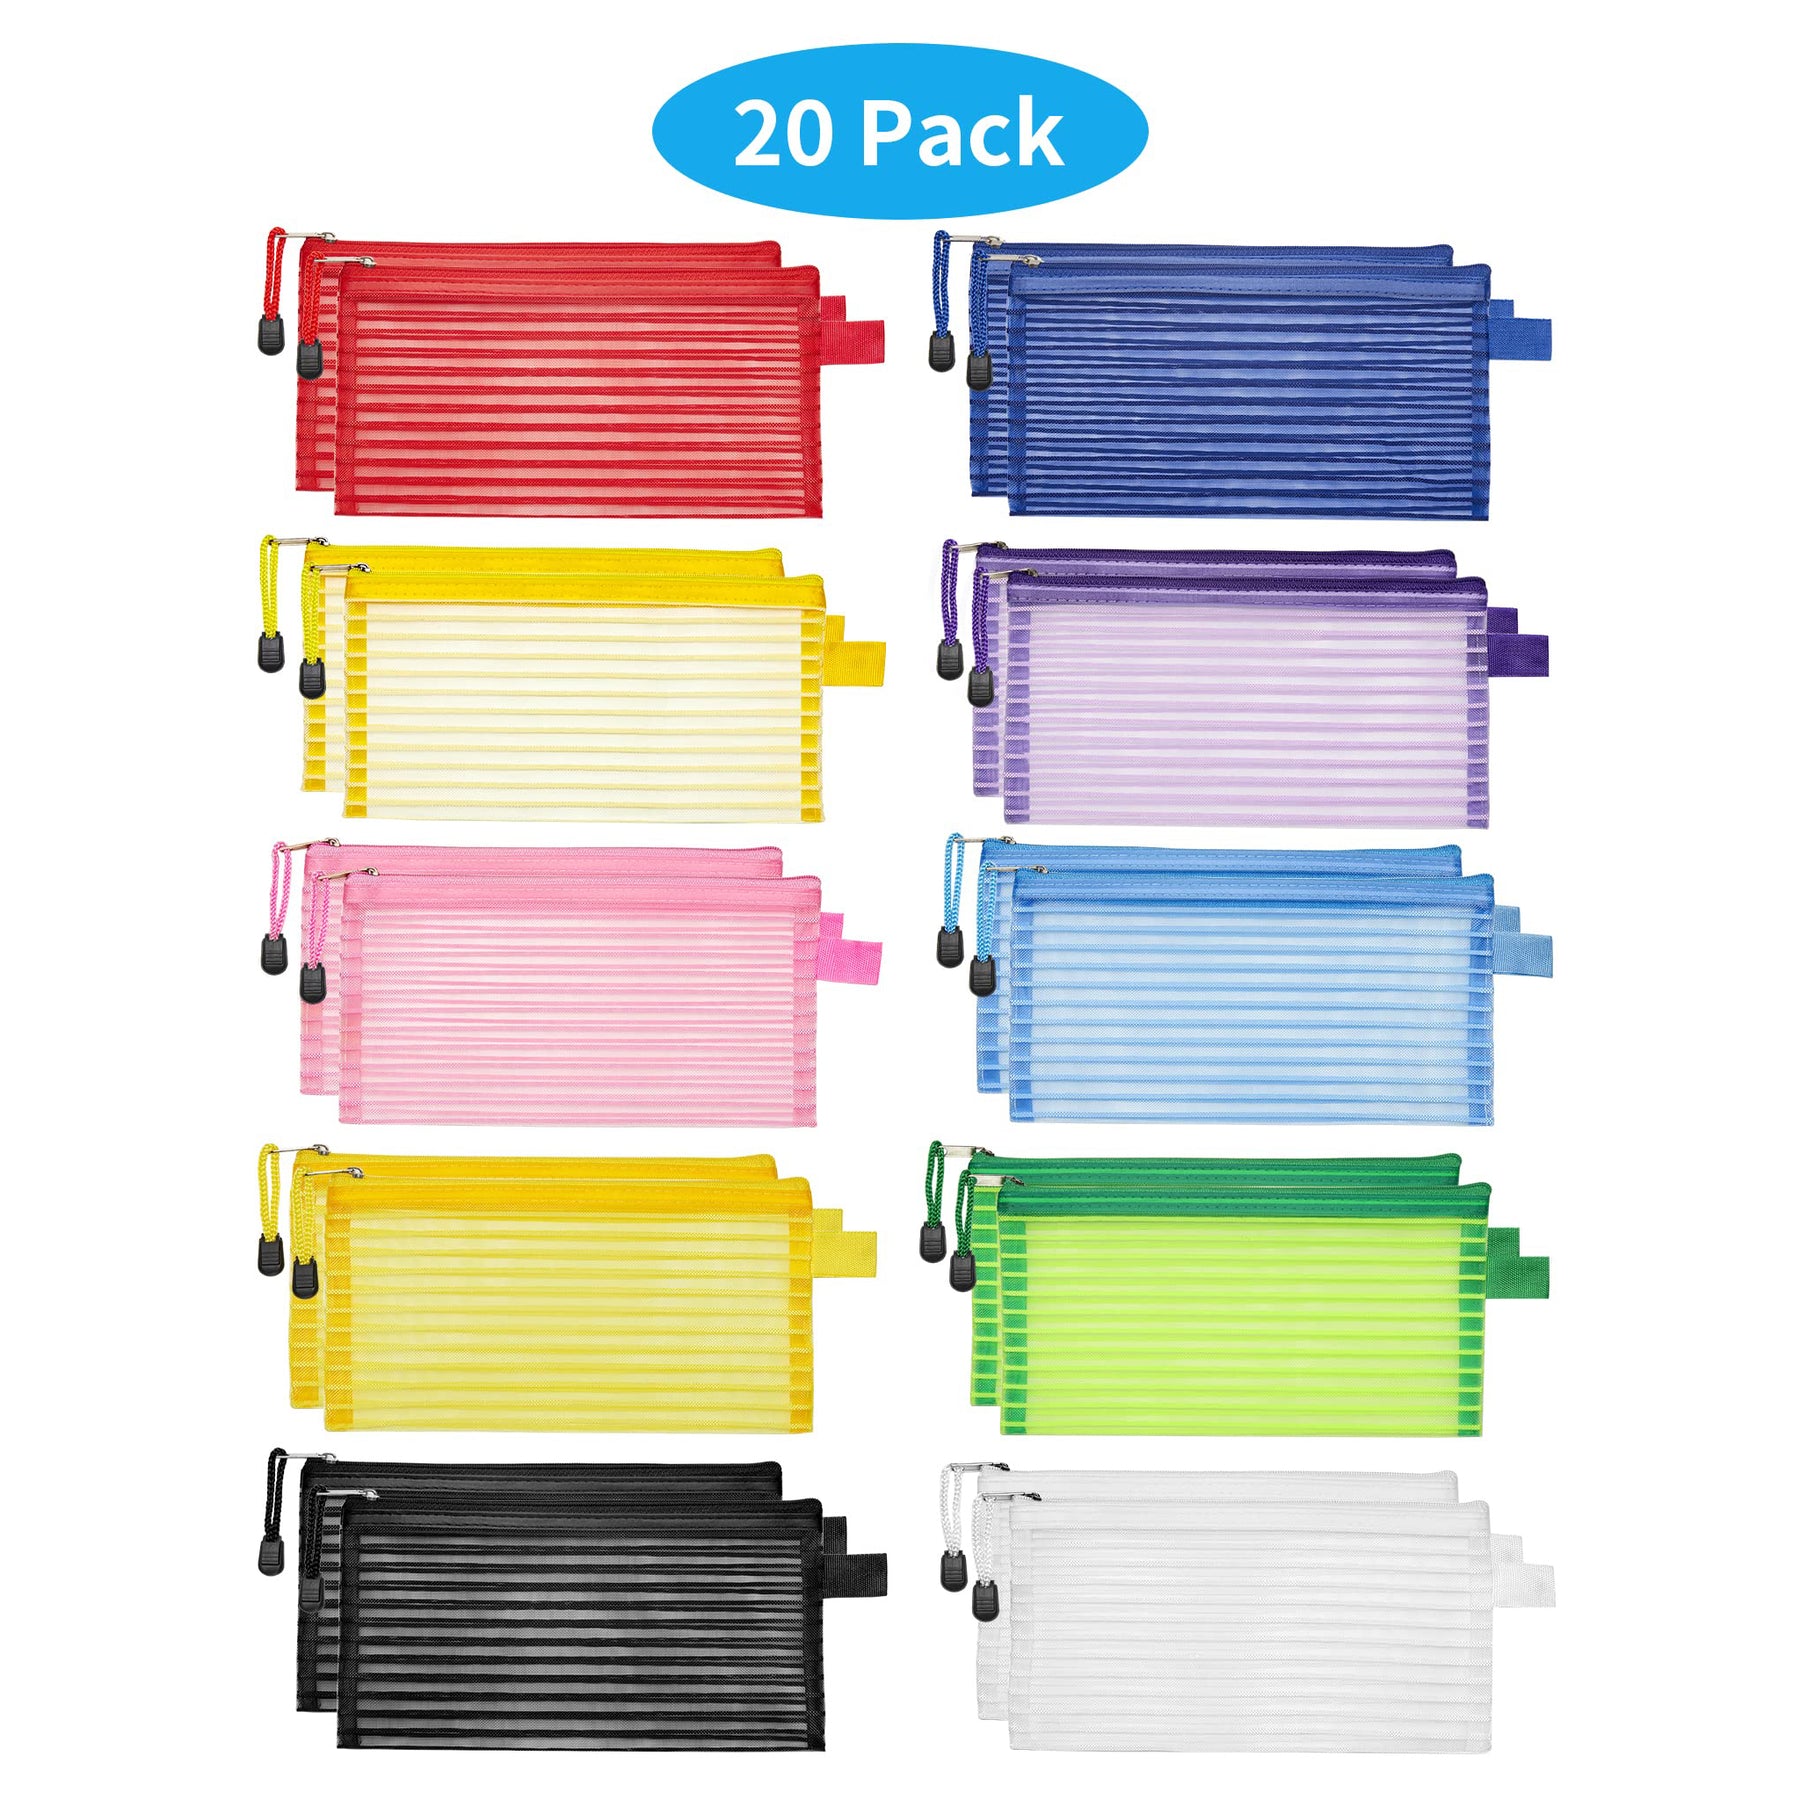 TrueLux-10-Pack-Colored-Mesh-Zipper-Pouch-Bags - The Family Brick